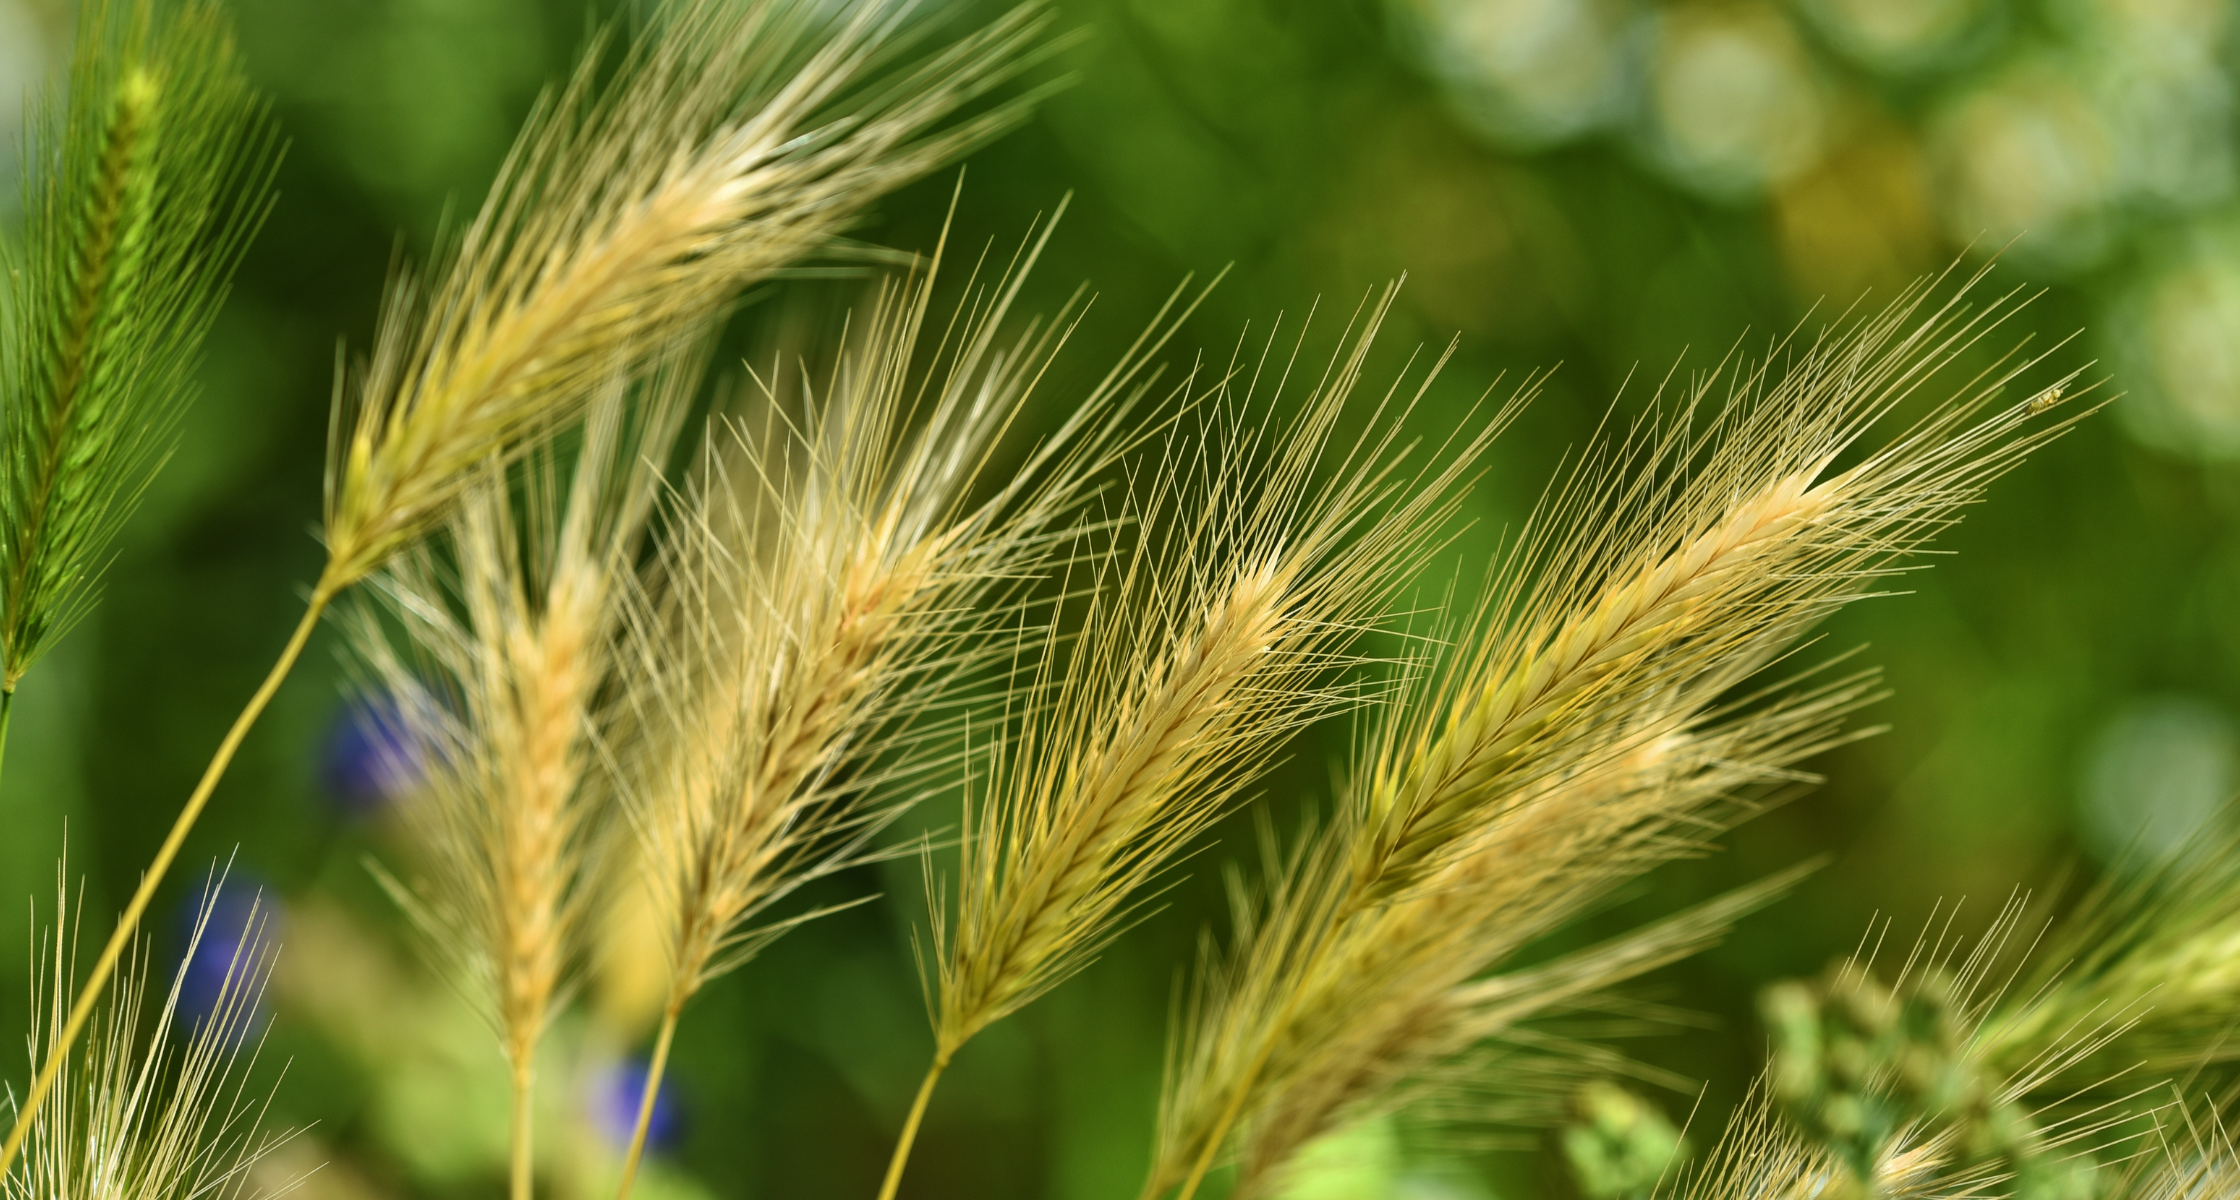 Dangers of Foxtail Grass – Protecting Your Pets from Hidden Hazards